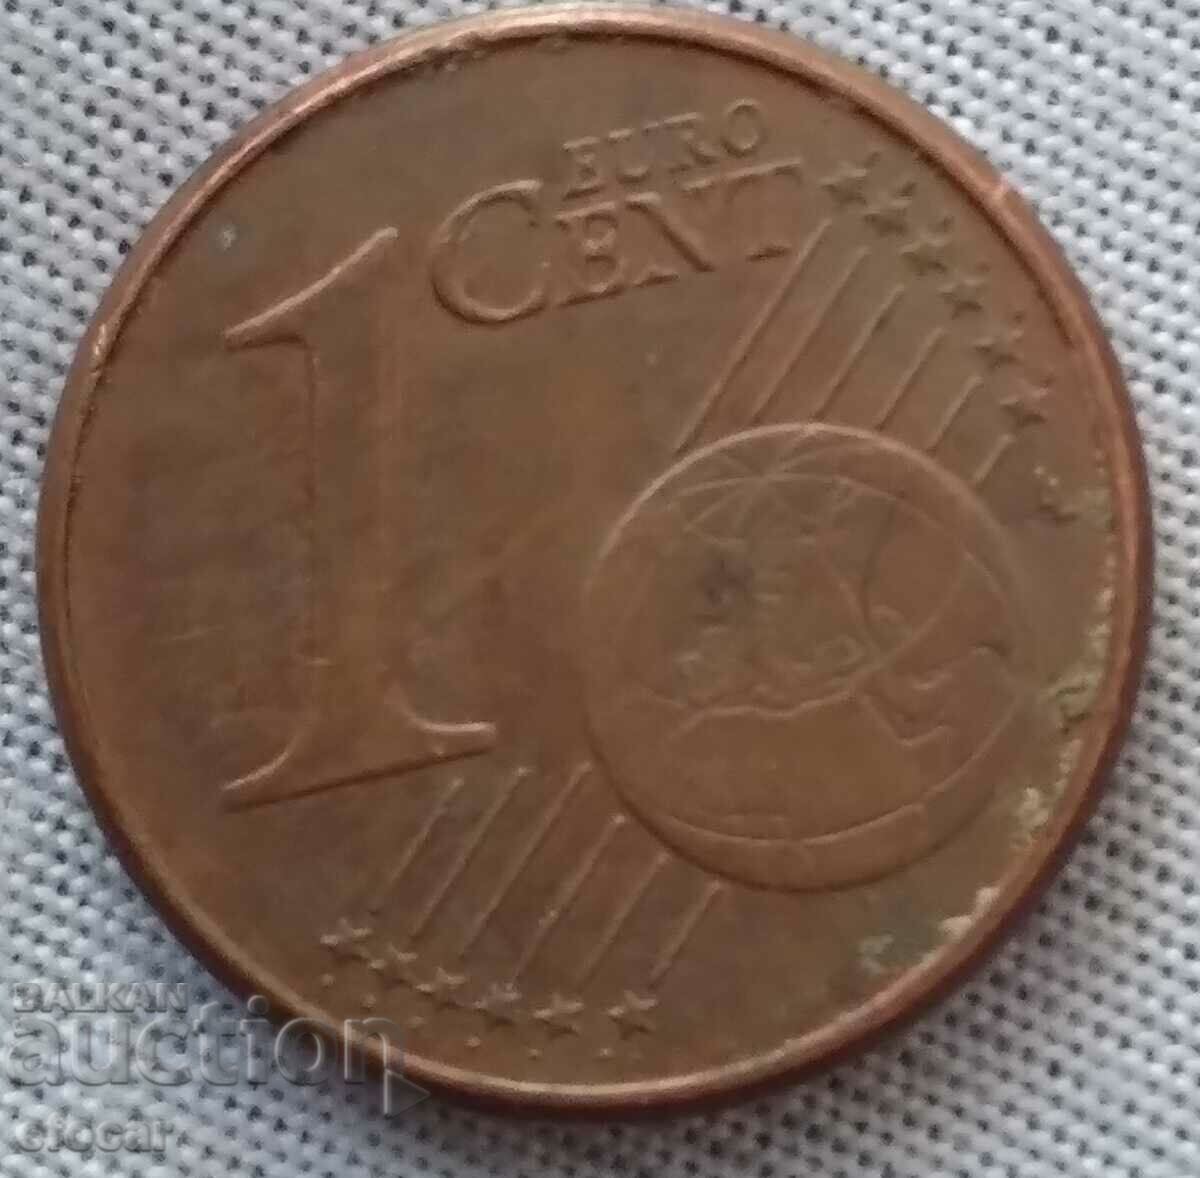 1 cent Germany 2009 starting from 0.01 cent